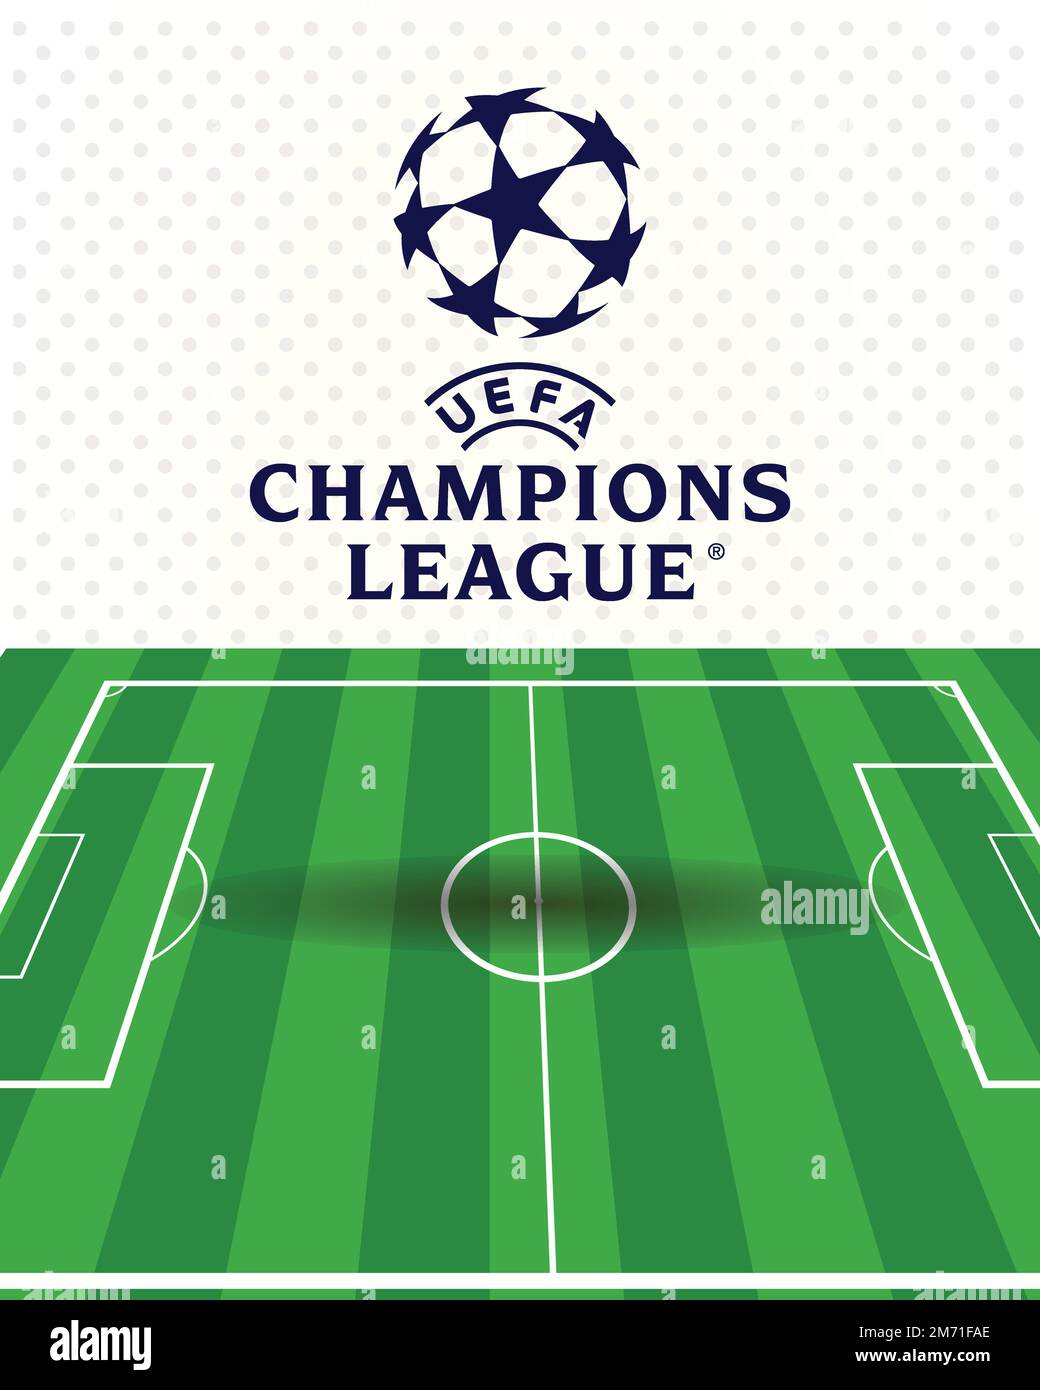 UEFA Champions League Logo with white background and green field, top professional top-division European clubs football league system : Colombo, SRL Stock Vector